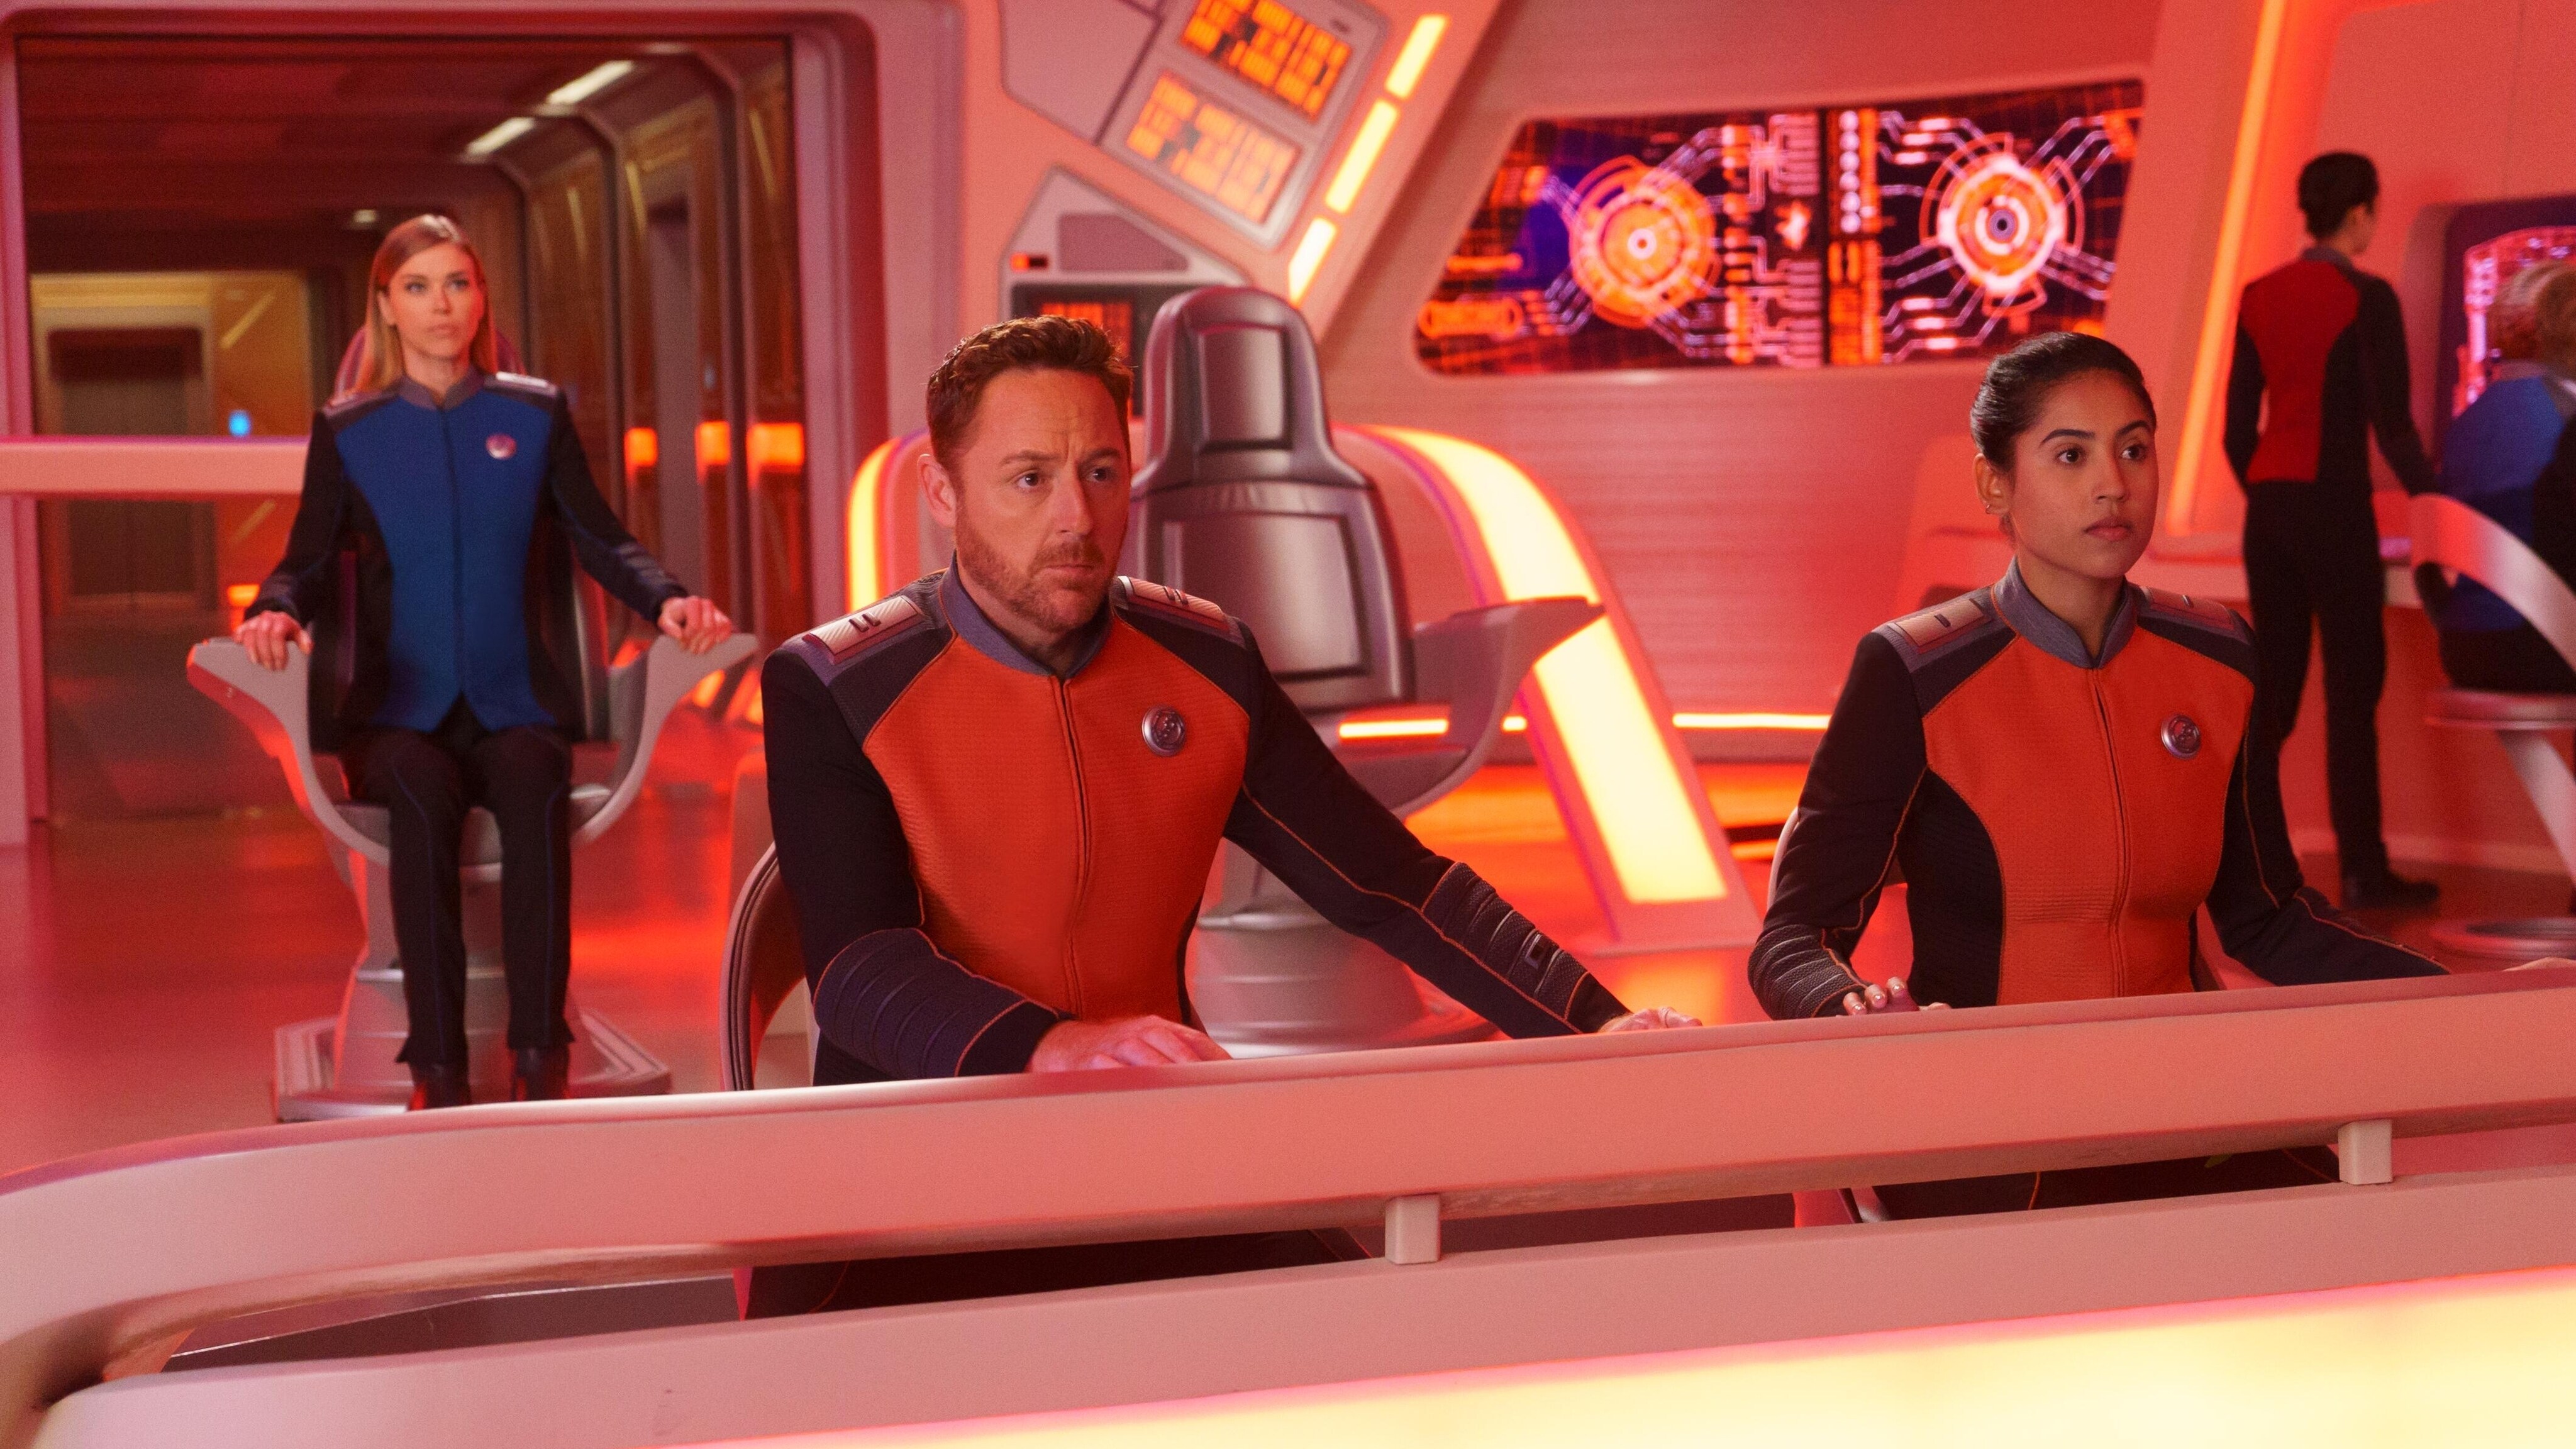 The Orville: New Horizons -- “Gently Falling Rain” - Episode 304 -- The Orville crew leads a Union delegation to sign a peace treaty with the Krill. Cmdr. Kelly Grayson (Adrianne Palicki) and Lt. Gordon Malloy (Scott Grimes), shown. (Photo by: Kevin Estrada/Hulu)